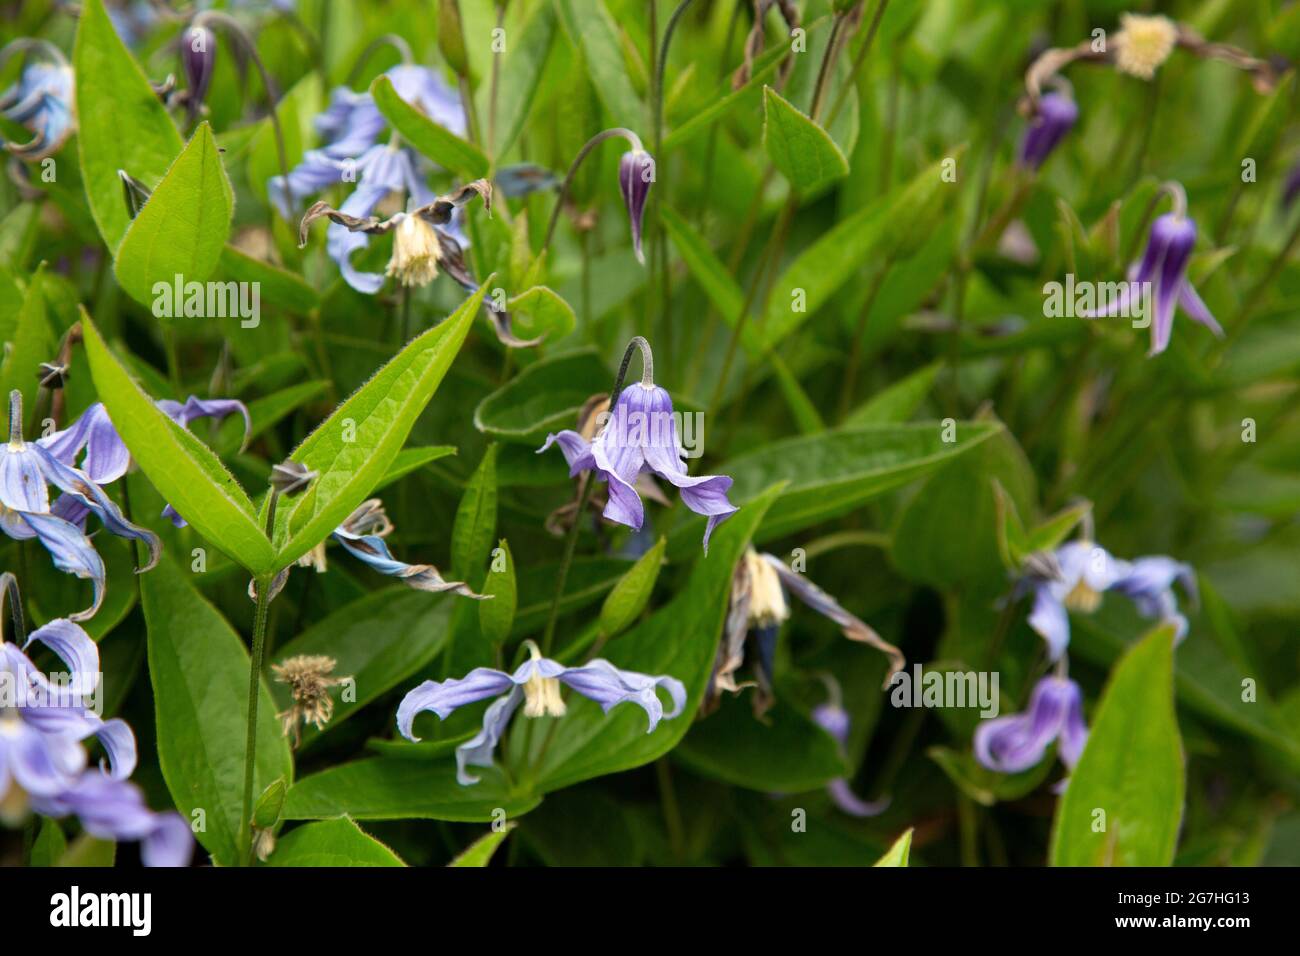 Clematis integrifolia 'Blue Ribbons' is a low growing bush clematis with curled petals. Stock Photo